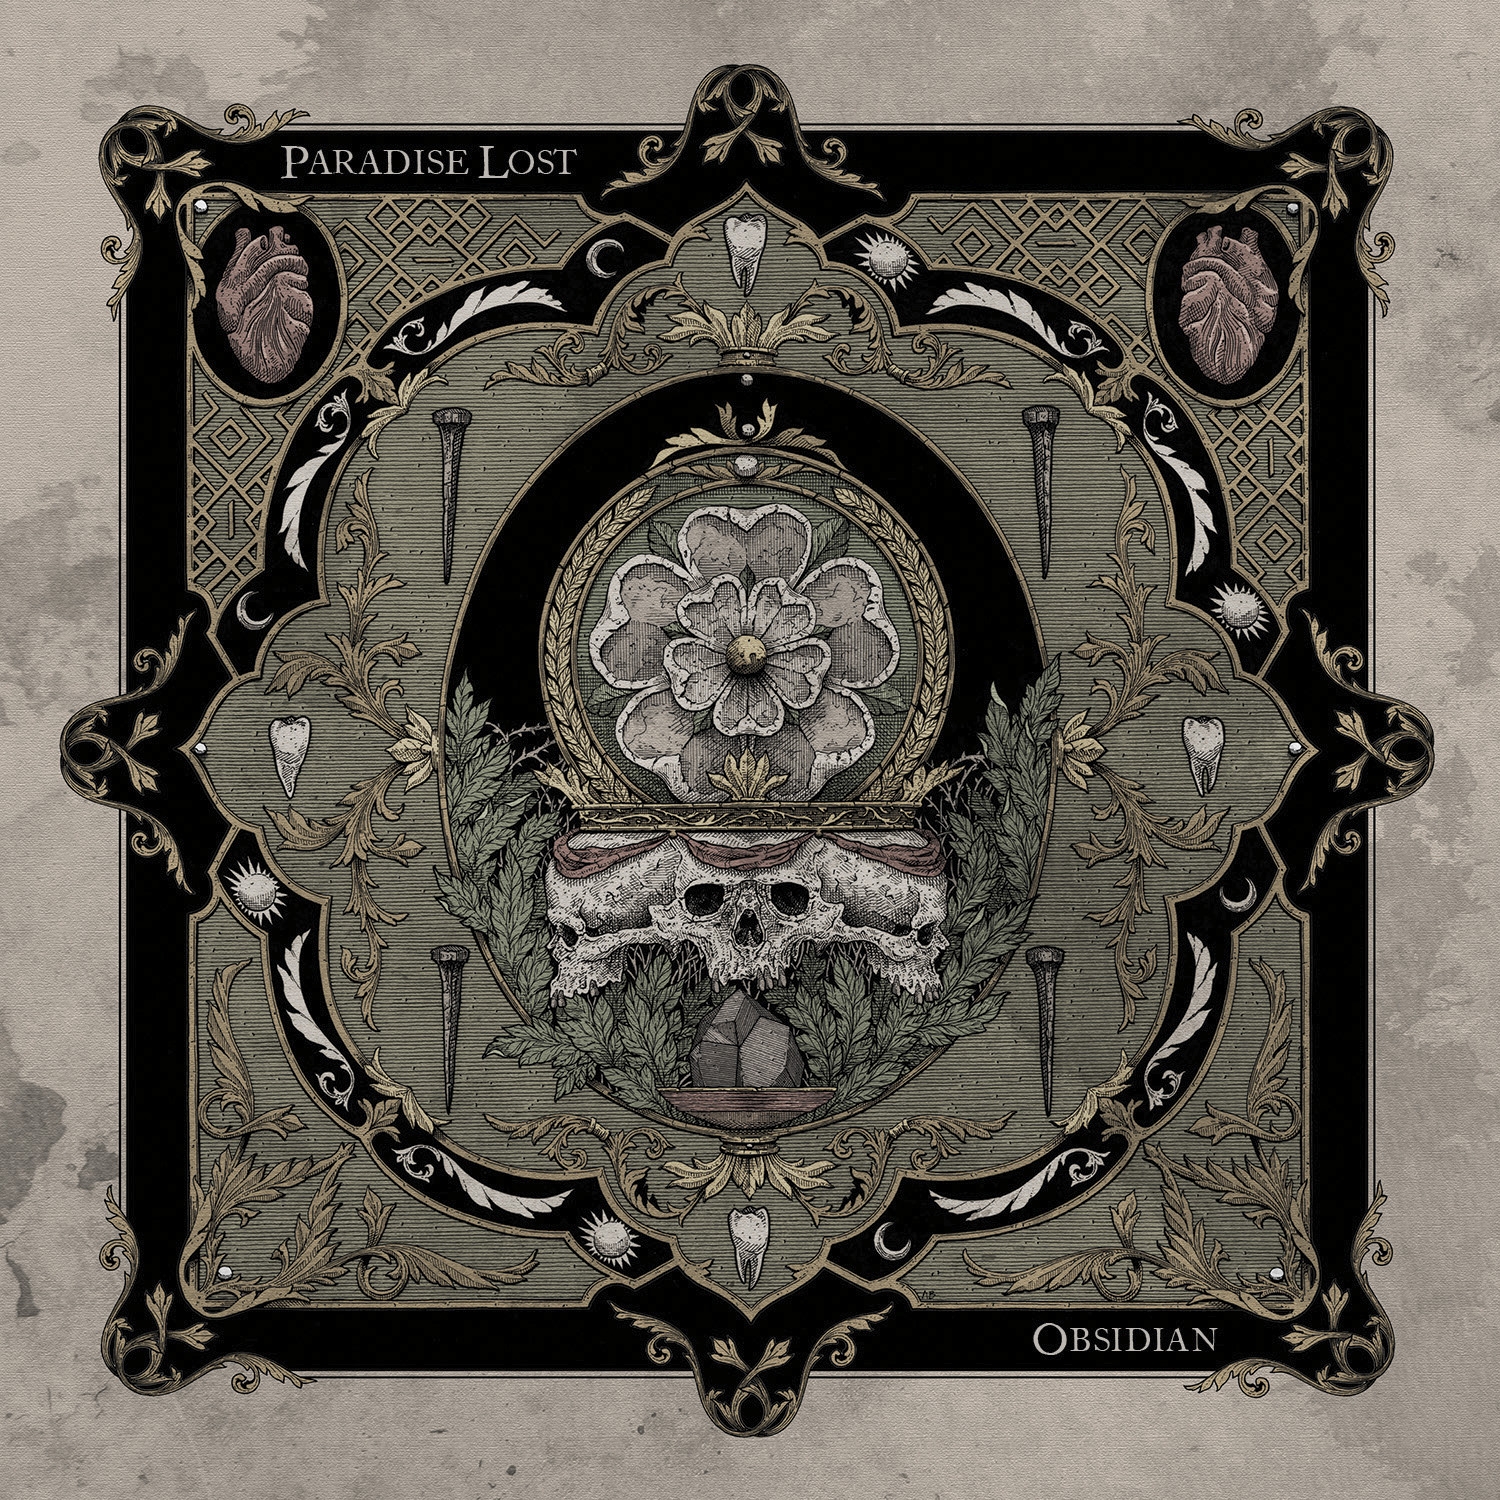 Metal-Gothic-Review: PARADISE LOST – Obsidian